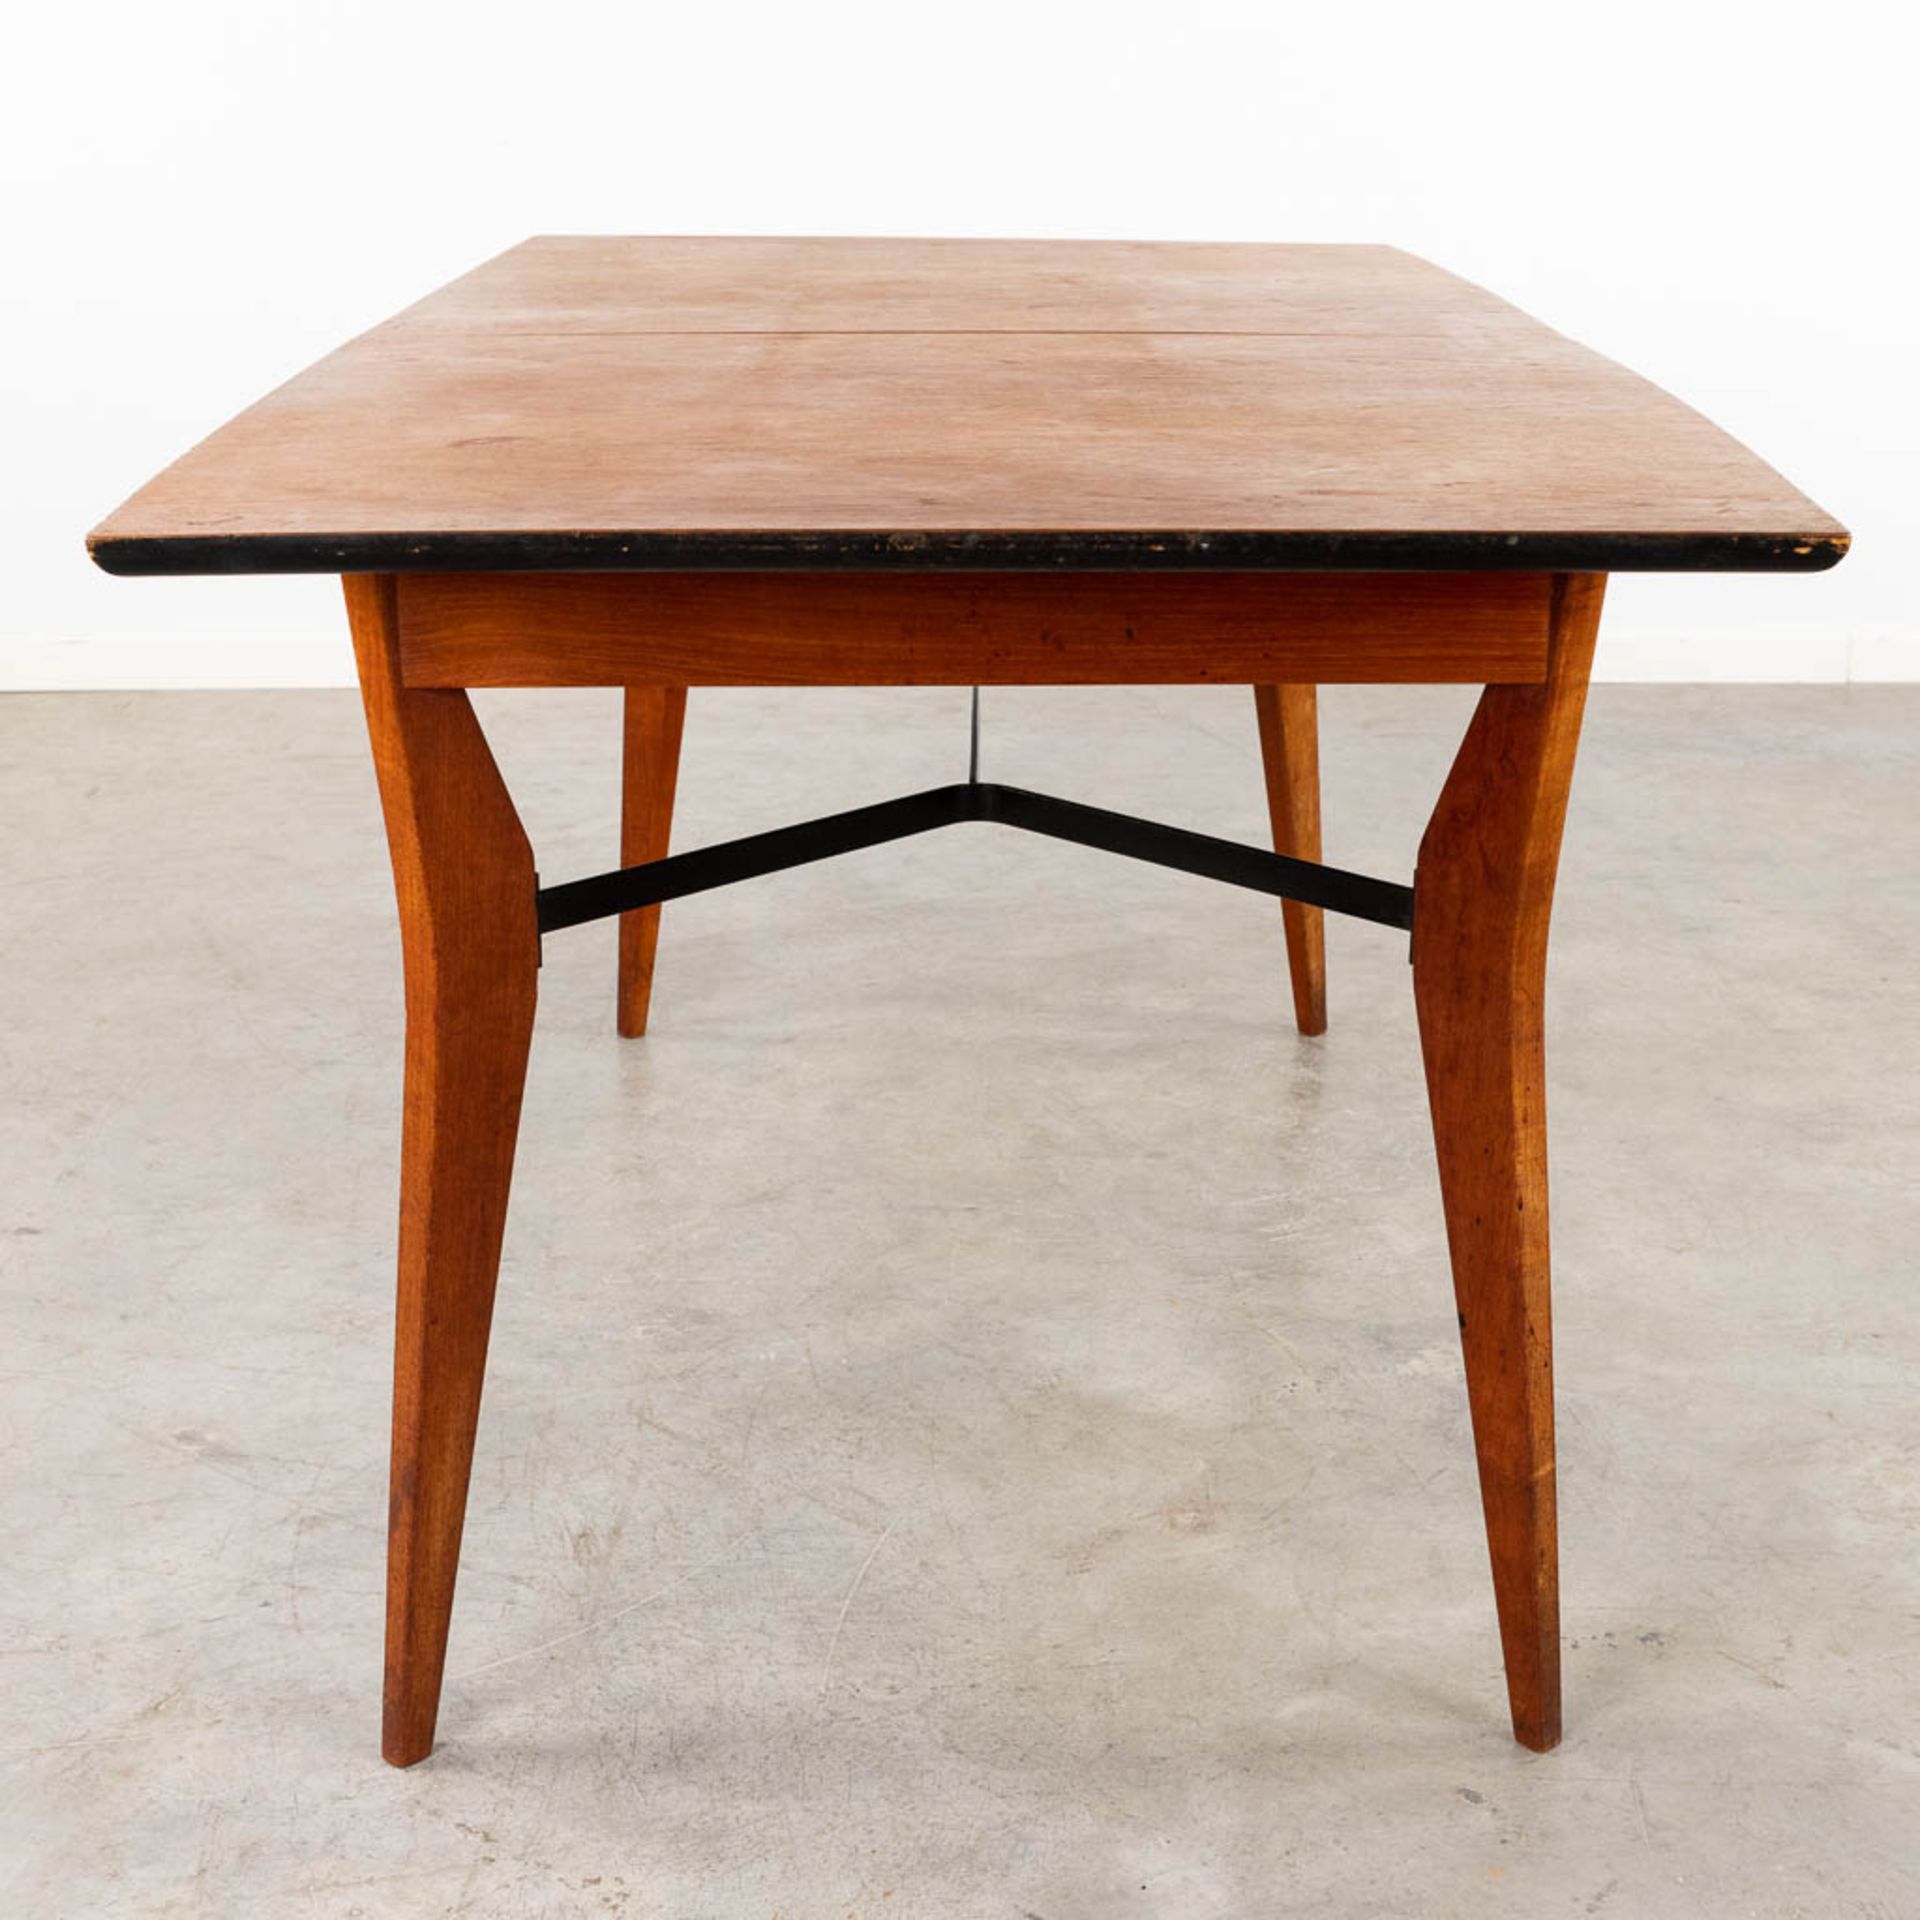 A mid-century table and 6 chairs, rotan and metal, teak wood. Circa 1960. (D:86 x W:160 x H:76 cm) - Image 16 of 31